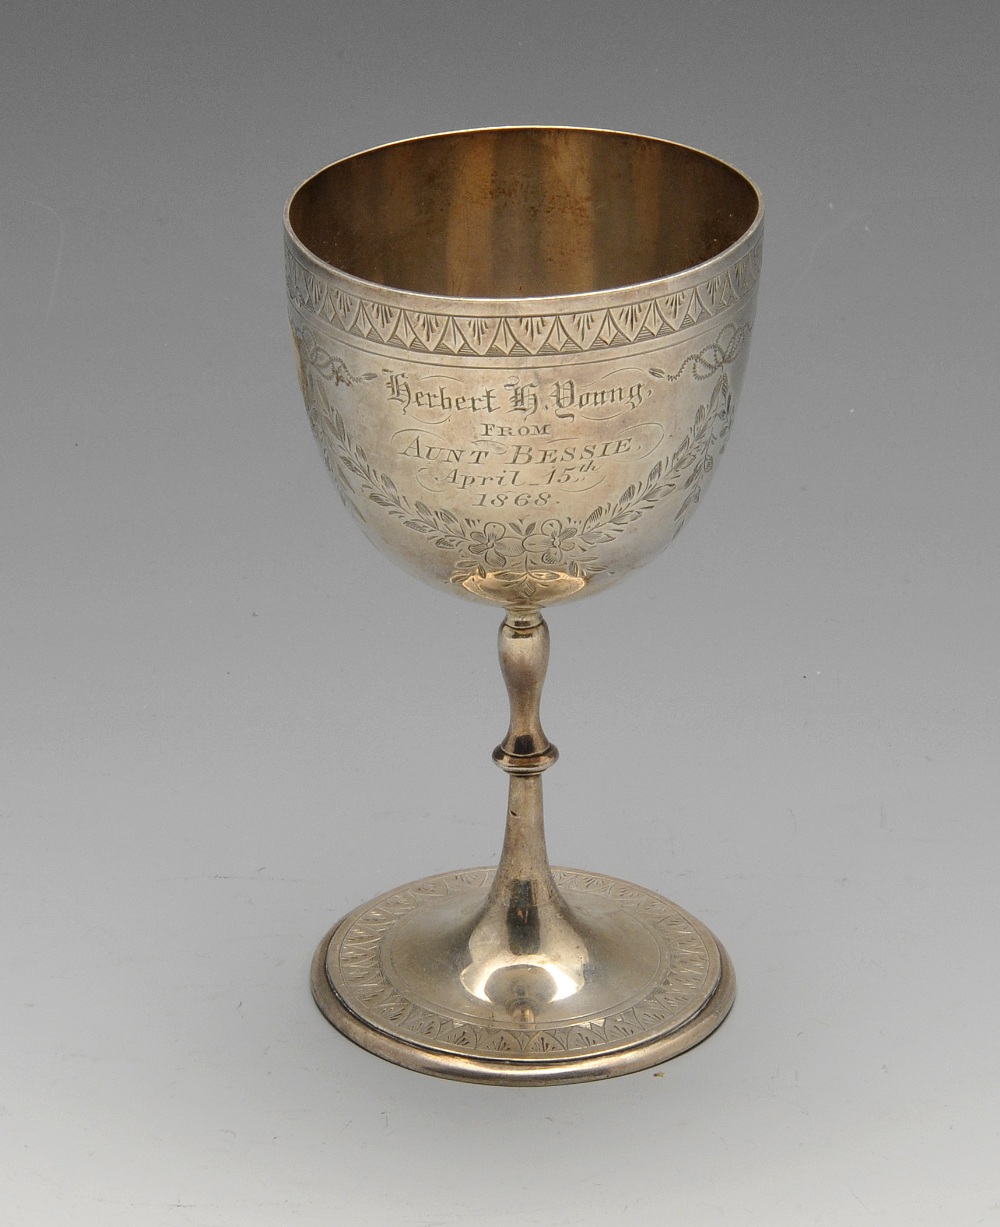 A Victorian silver goblet engraved with floral swags and presentation inscription. Hallmarked H J